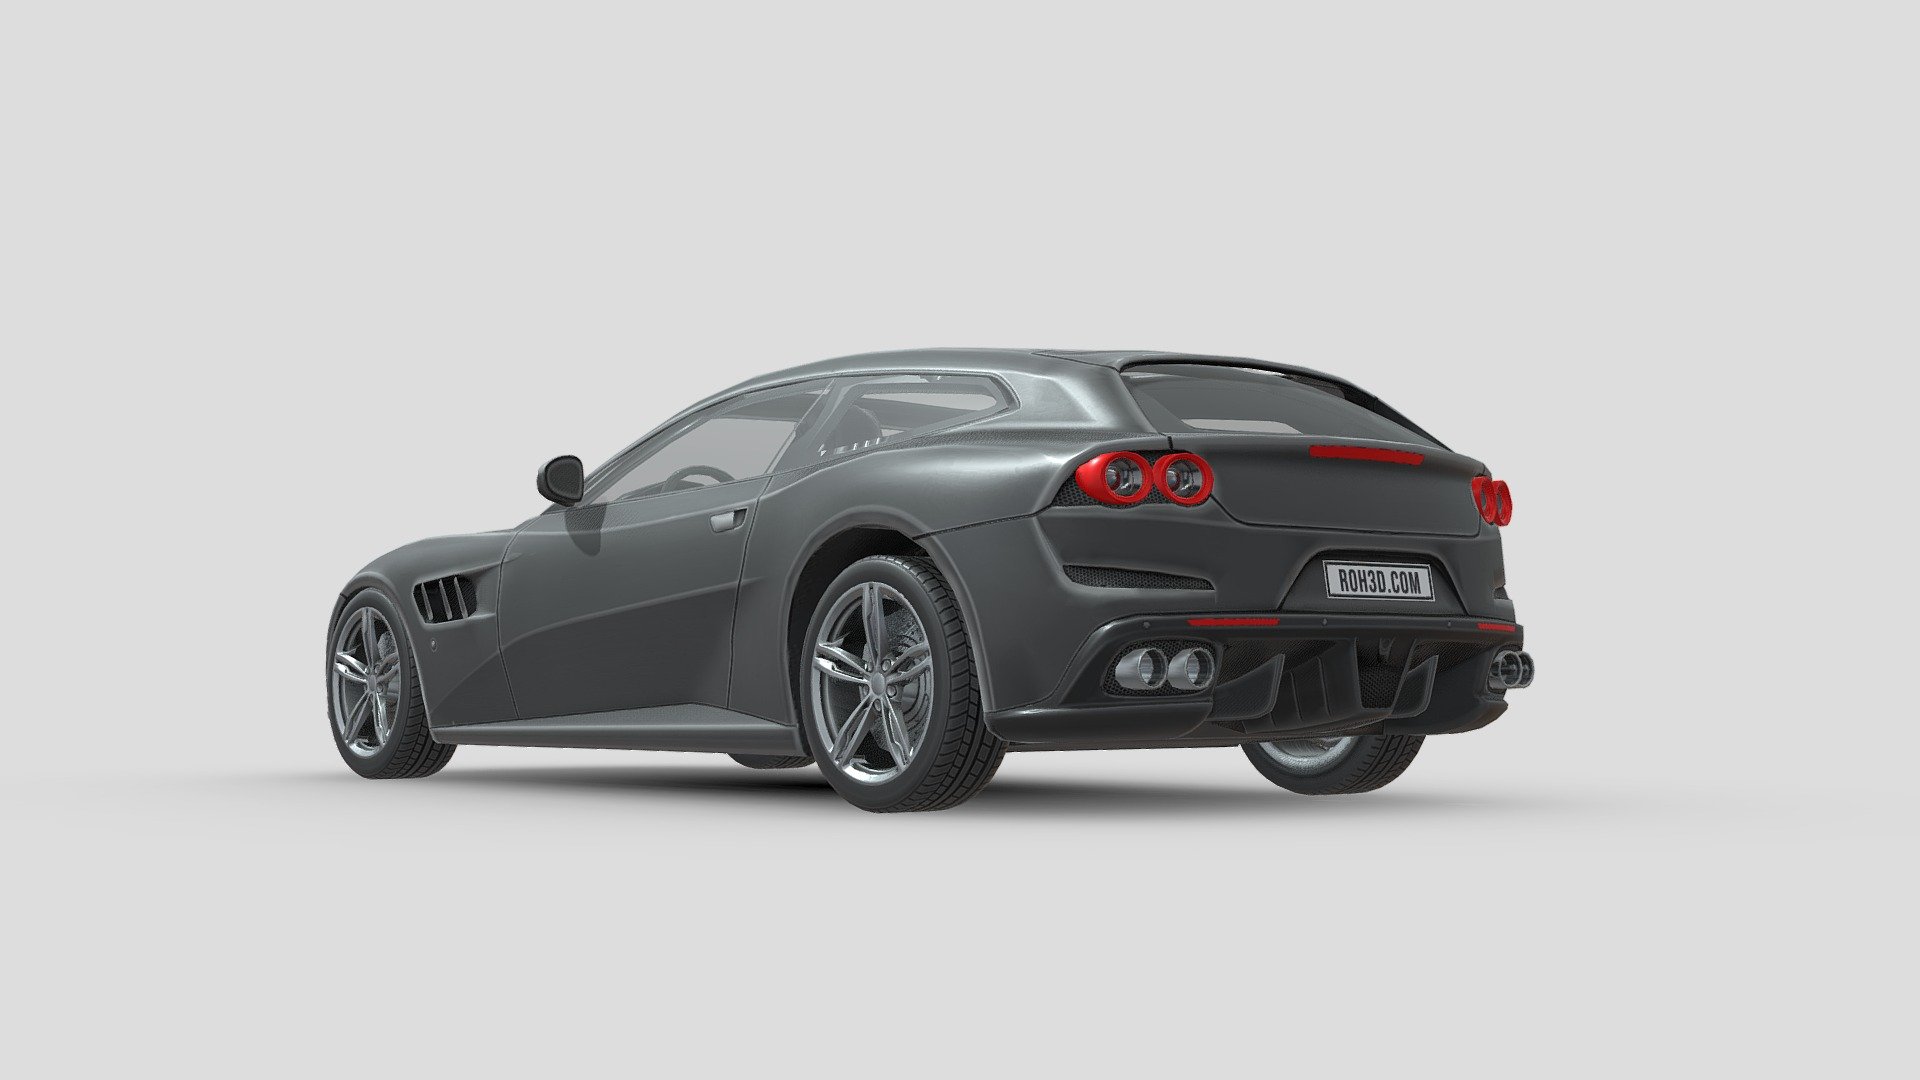 The Ferrari GTC4Lusso (Type F151M) is a four-seat full-size grand tourer produced by Italian automobile manufacturer Ferrari. The GTC4Lusso is a successor to the Ferrari FF.

The rear features Ferrari's signature Quad Circular Rear Lights (last seen on the F430 and later seen on the 812 Superfast) and the interior contains a Dual Cockpit Concept Design, separating the Driver Cockpit and the Passenger Cockpit by a central divider. The front of the car has a single grille that provides all the necessary cooling.

The GTC4Lusso is a further refinement of the shooting-brake coupe, reinterpreting the concept with an extremely streamlined, tapered shape that gives it an almost fastback-like silhouette 3d model